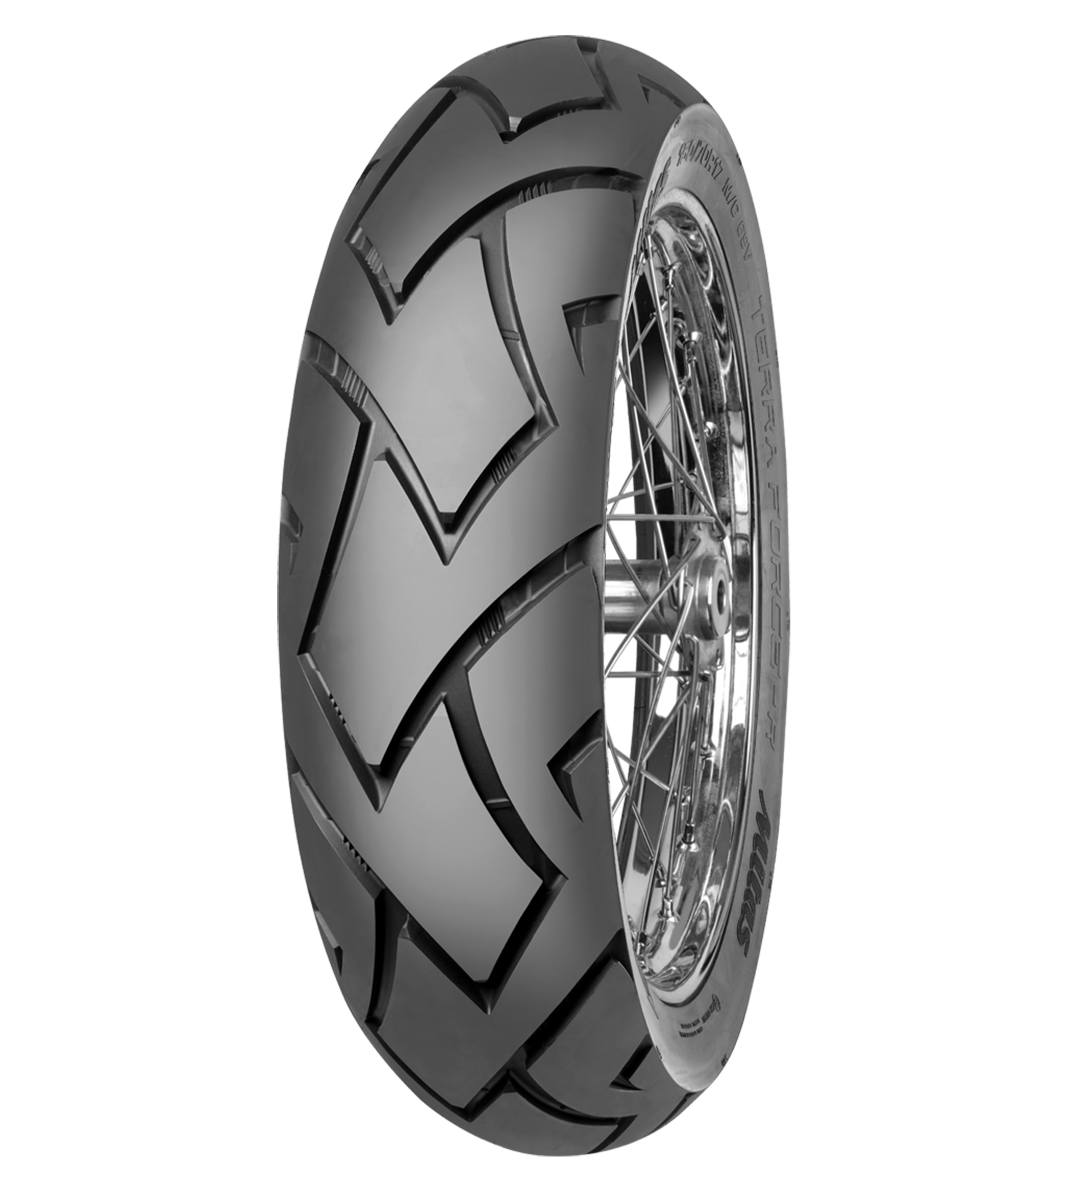 Mitas TERRA FORCE-R 150/70R18 Trail ON Trail 70V No Stripe Tubeless Rear Tire, 605796, 150/70R18, Adventure Touring, Rear, Terra Force, Terra Force-R, Trail, Trail ON, Tires - Imported and distributed in North & South America by Lindeco Genuine Powersports - Premier Powersports Equipment and Accessories for Motorcycle Enthusiasts, Professional Riders and Dealers.